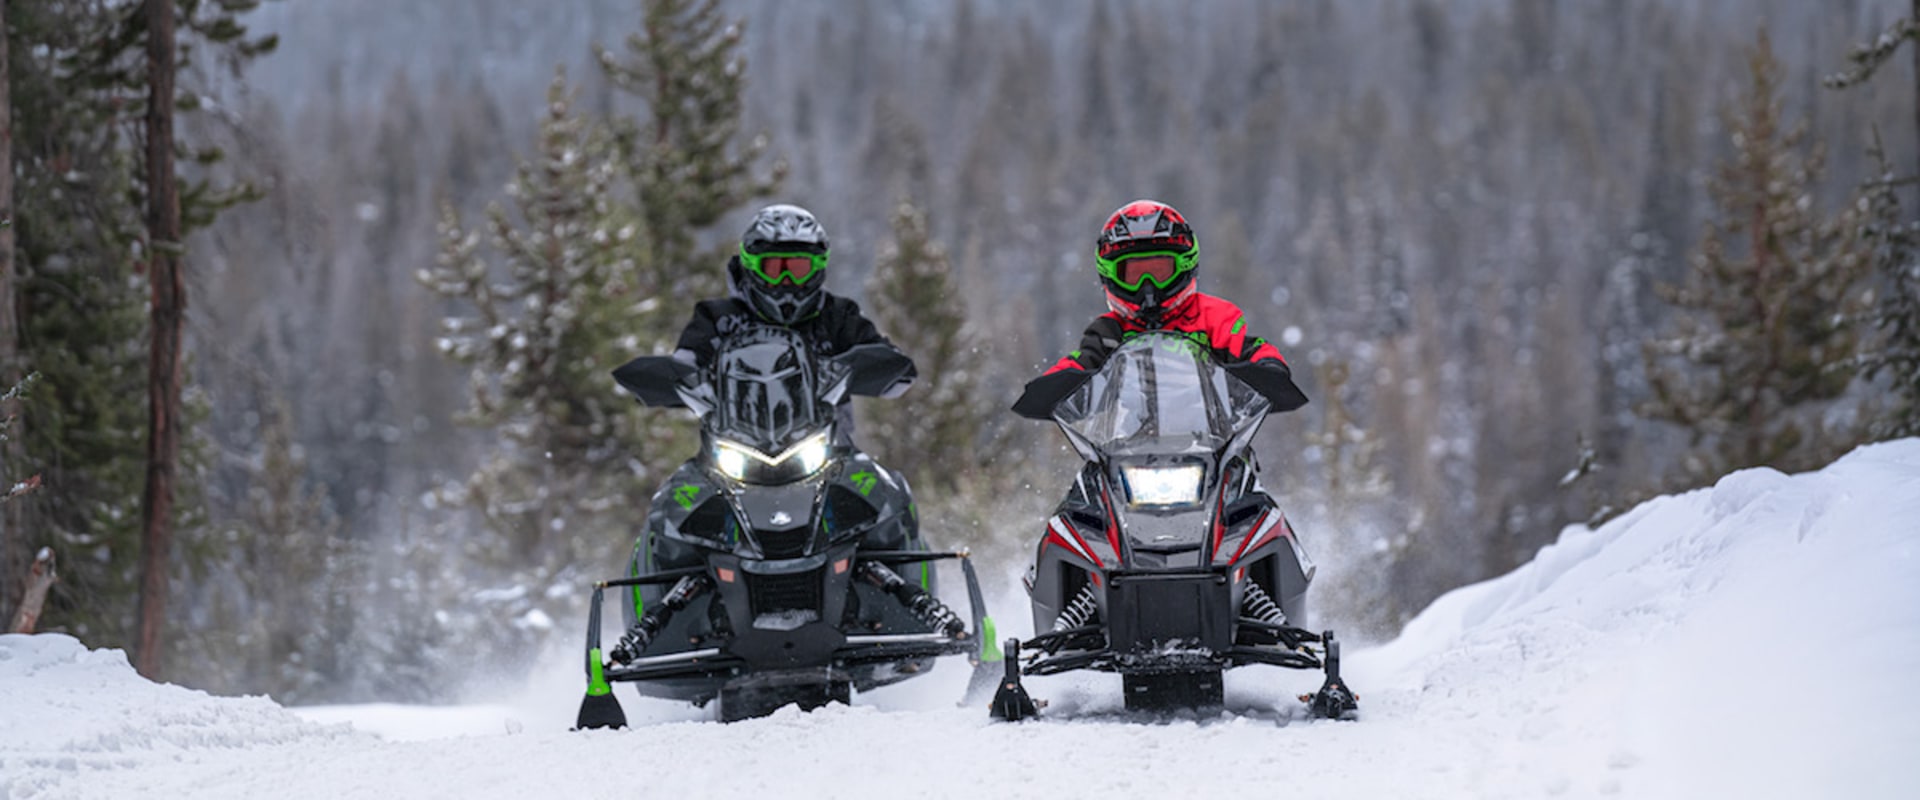 What is the fastest snowmobile on the market?